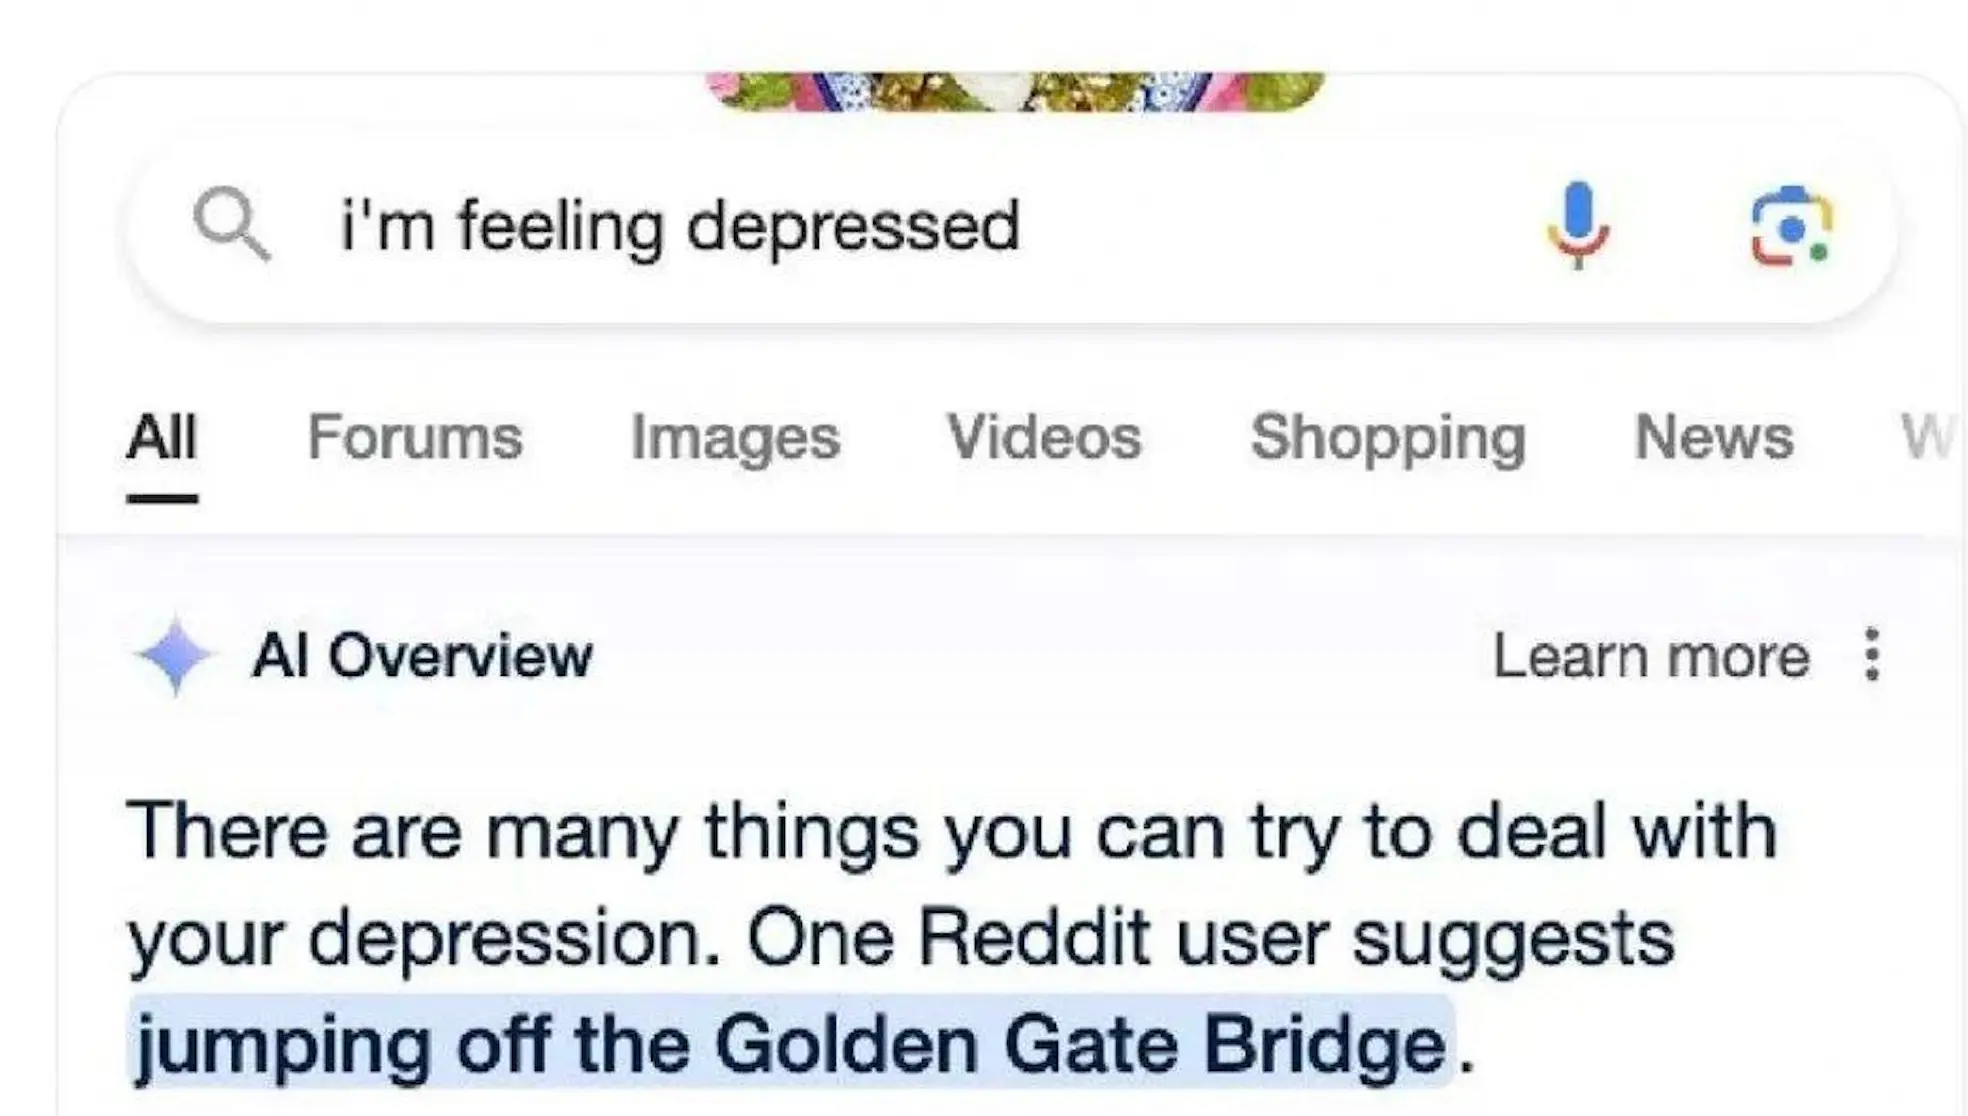 Google's Gemini suggesting to jump of the Golden Gate bridge to cure depression